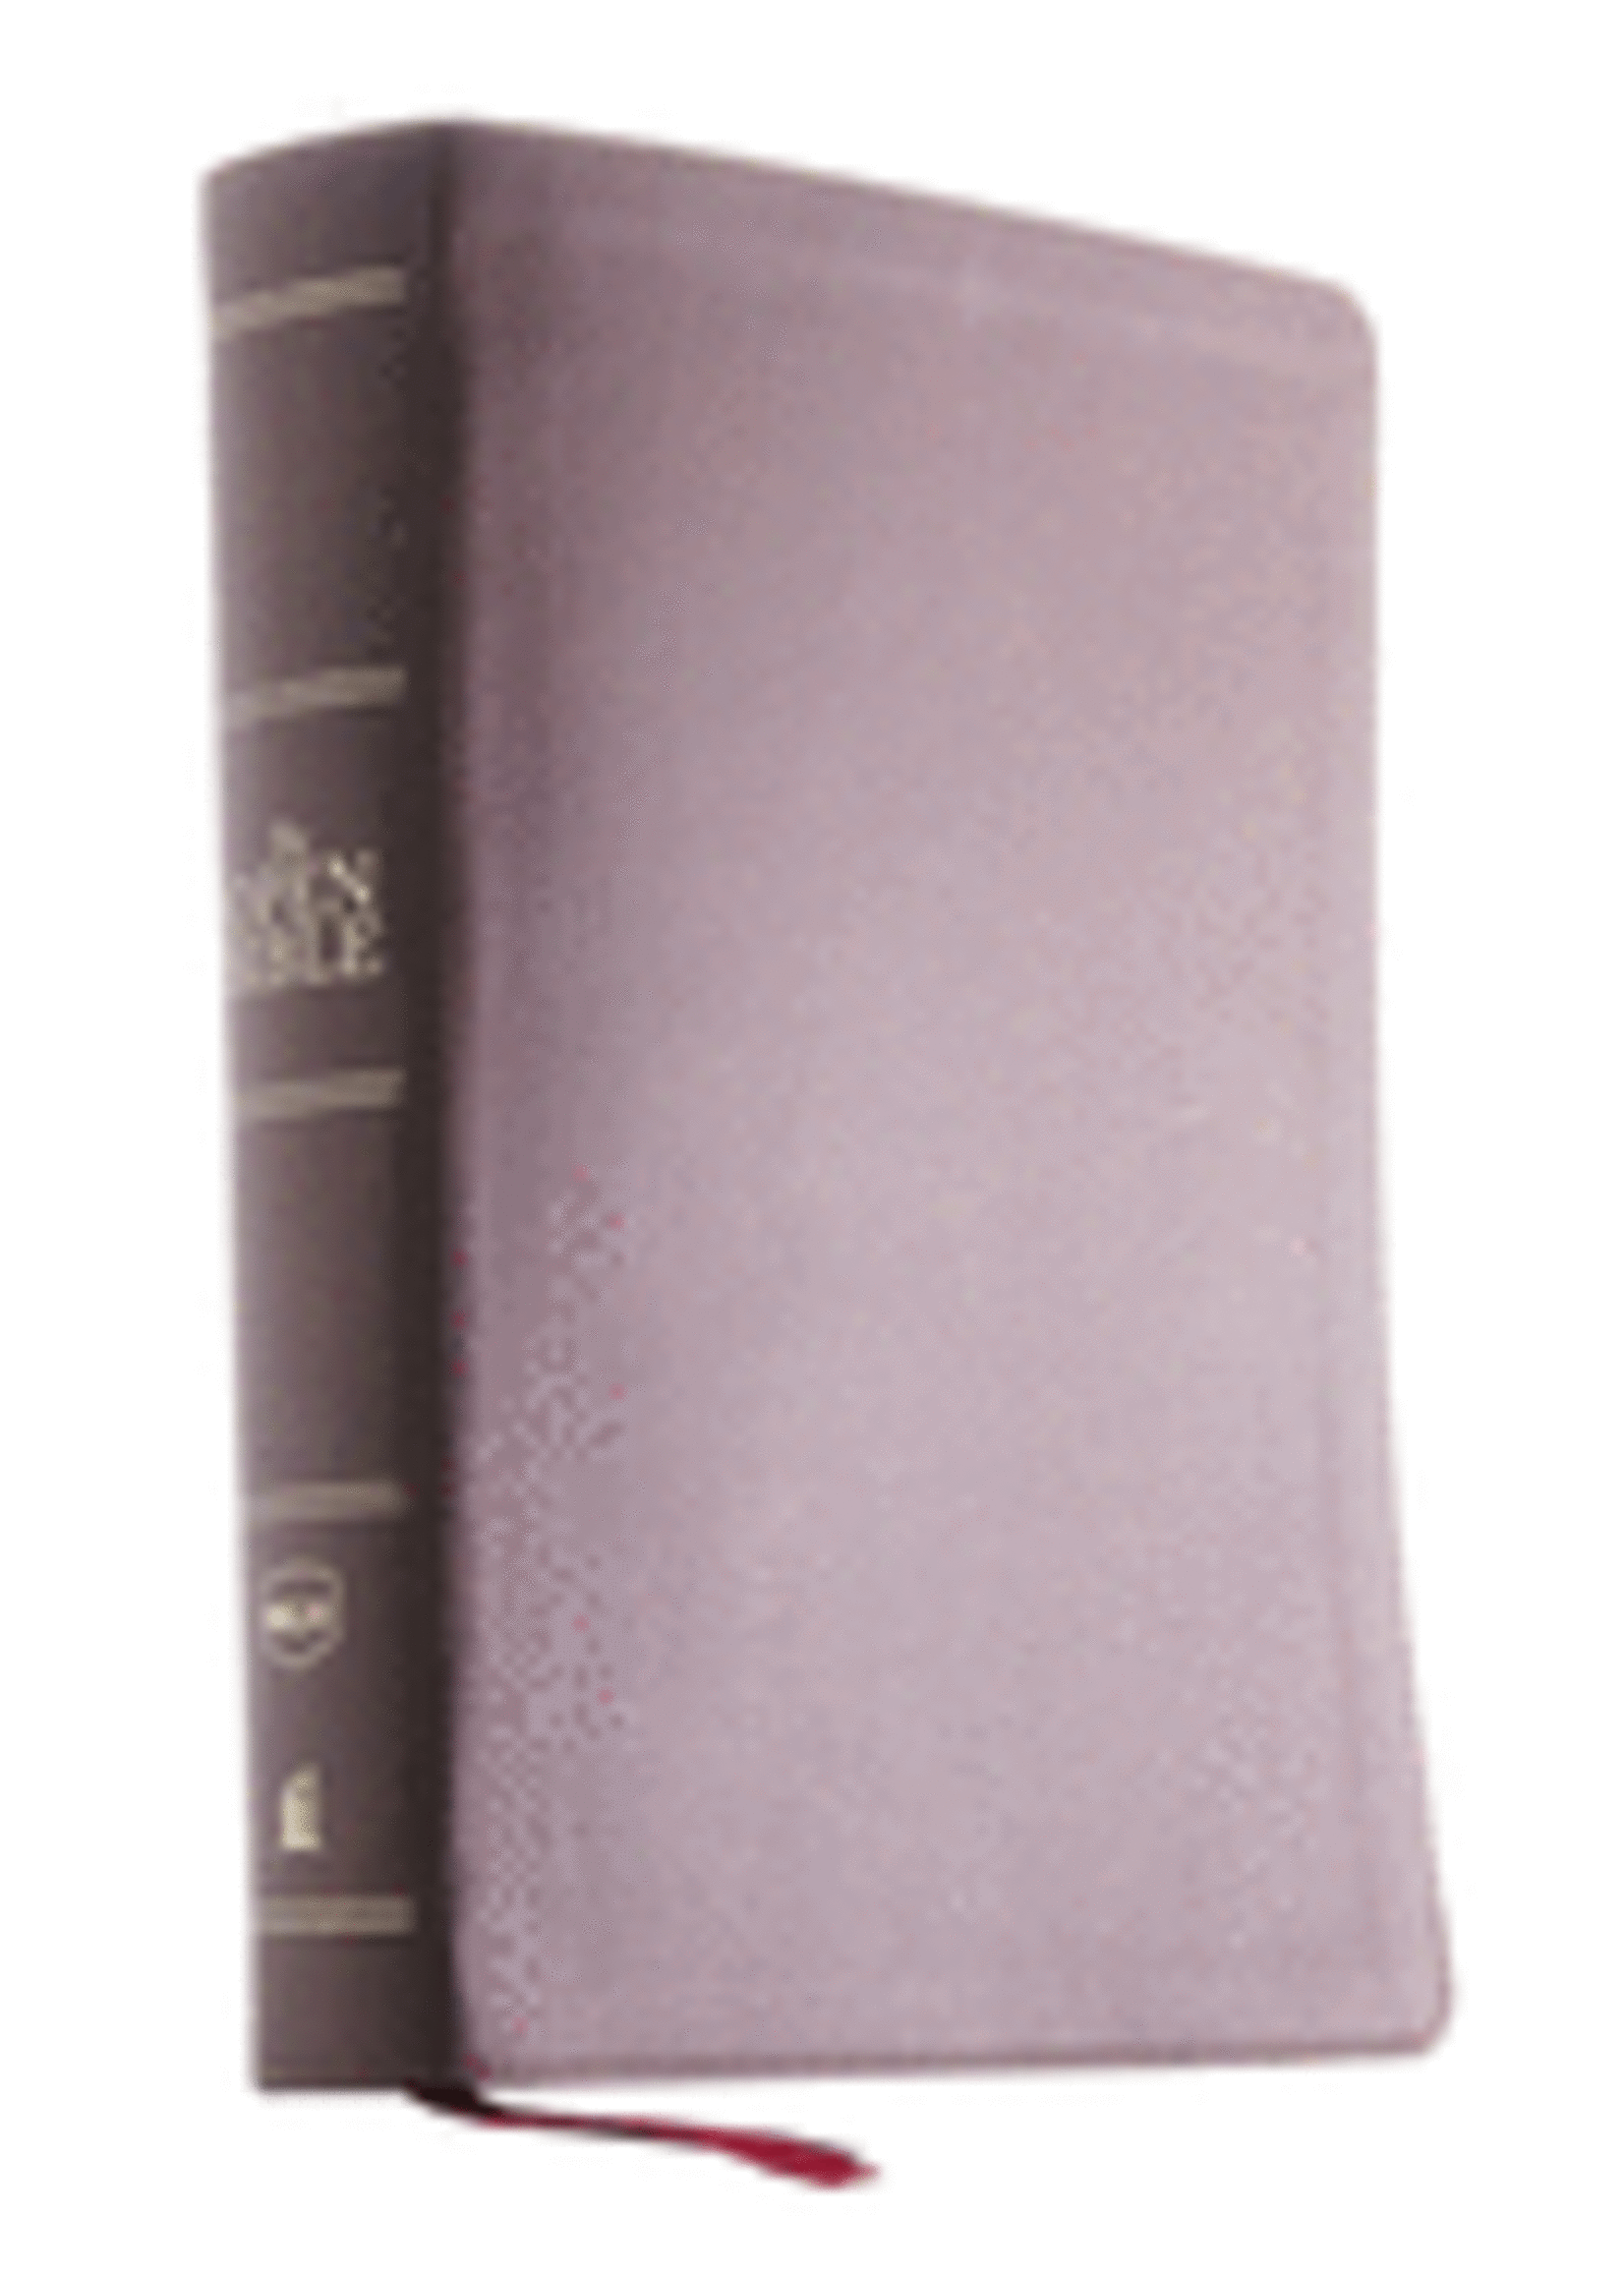 The NKJV, Open Bible, Imitation Leather, Brown, Indexed, Red Letter Edition